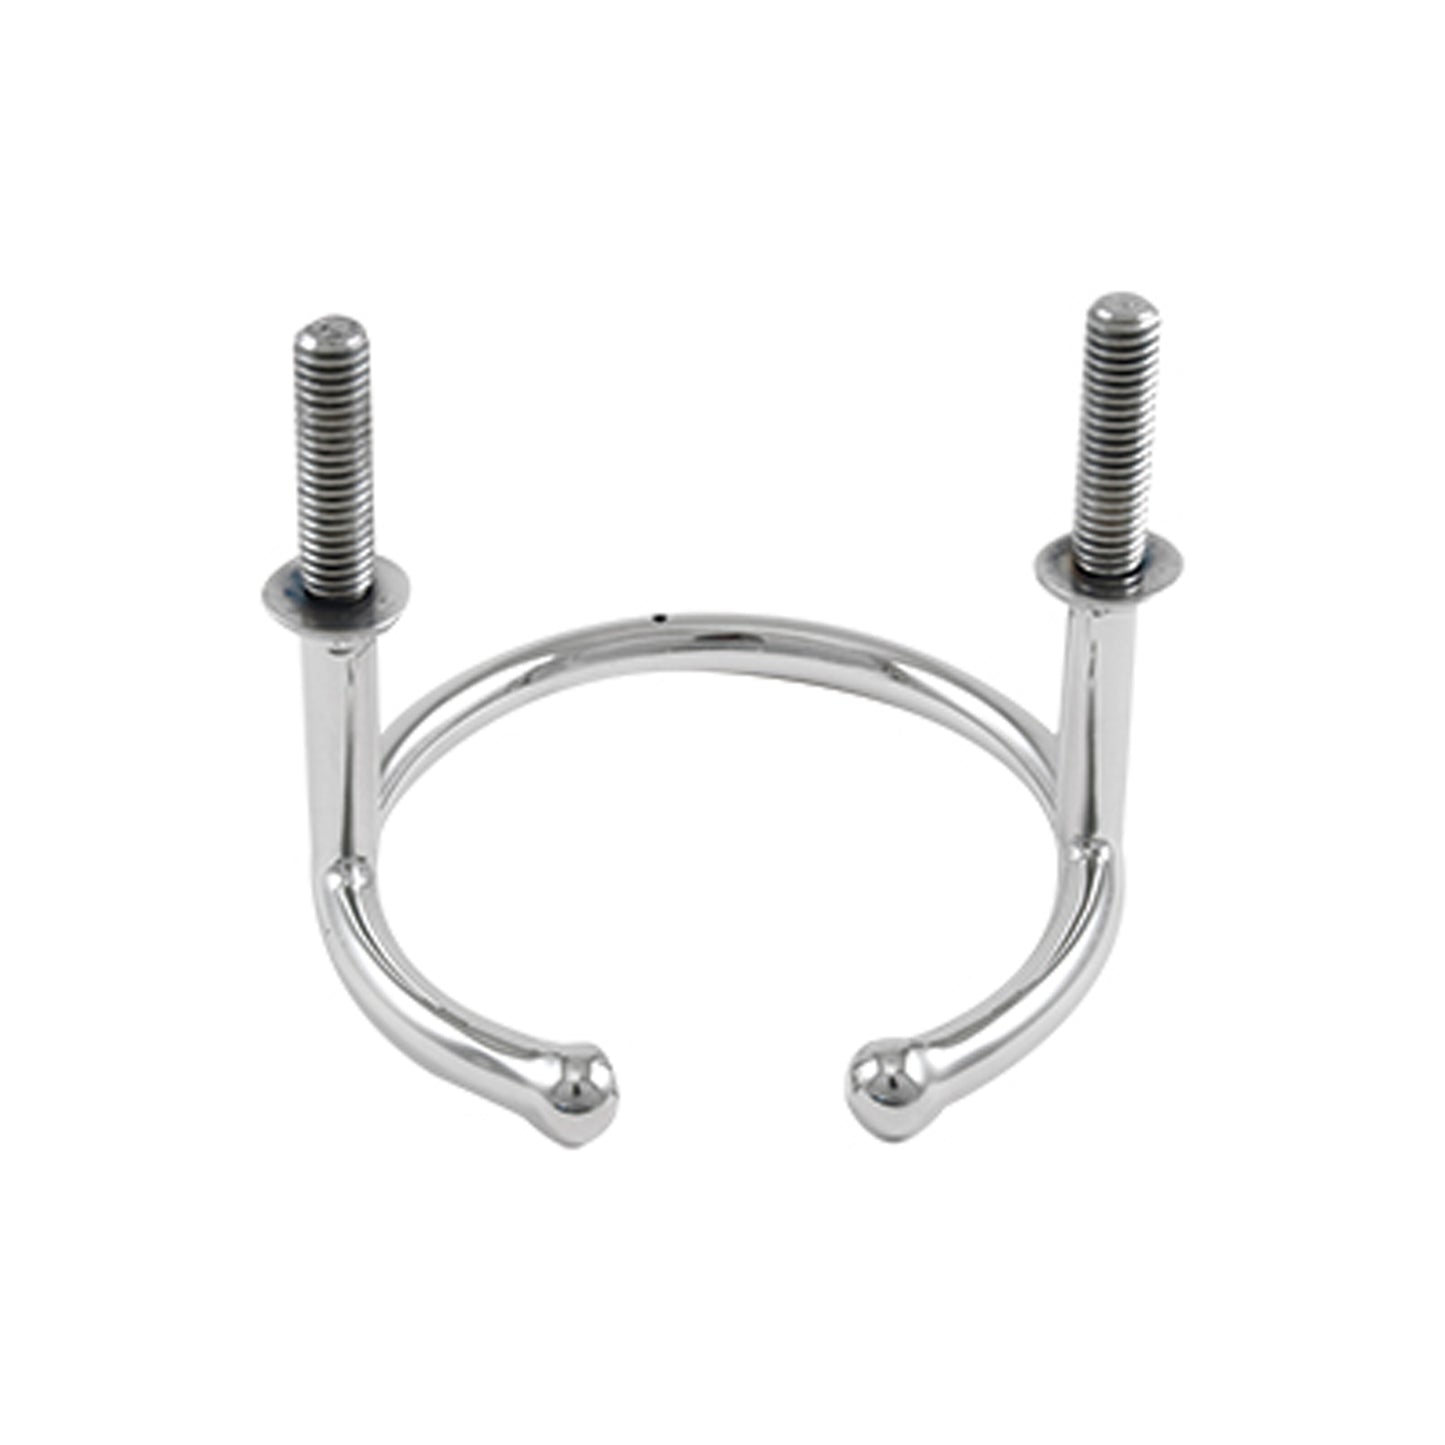 Top Mount Ring Cup Holder - Stud Mount